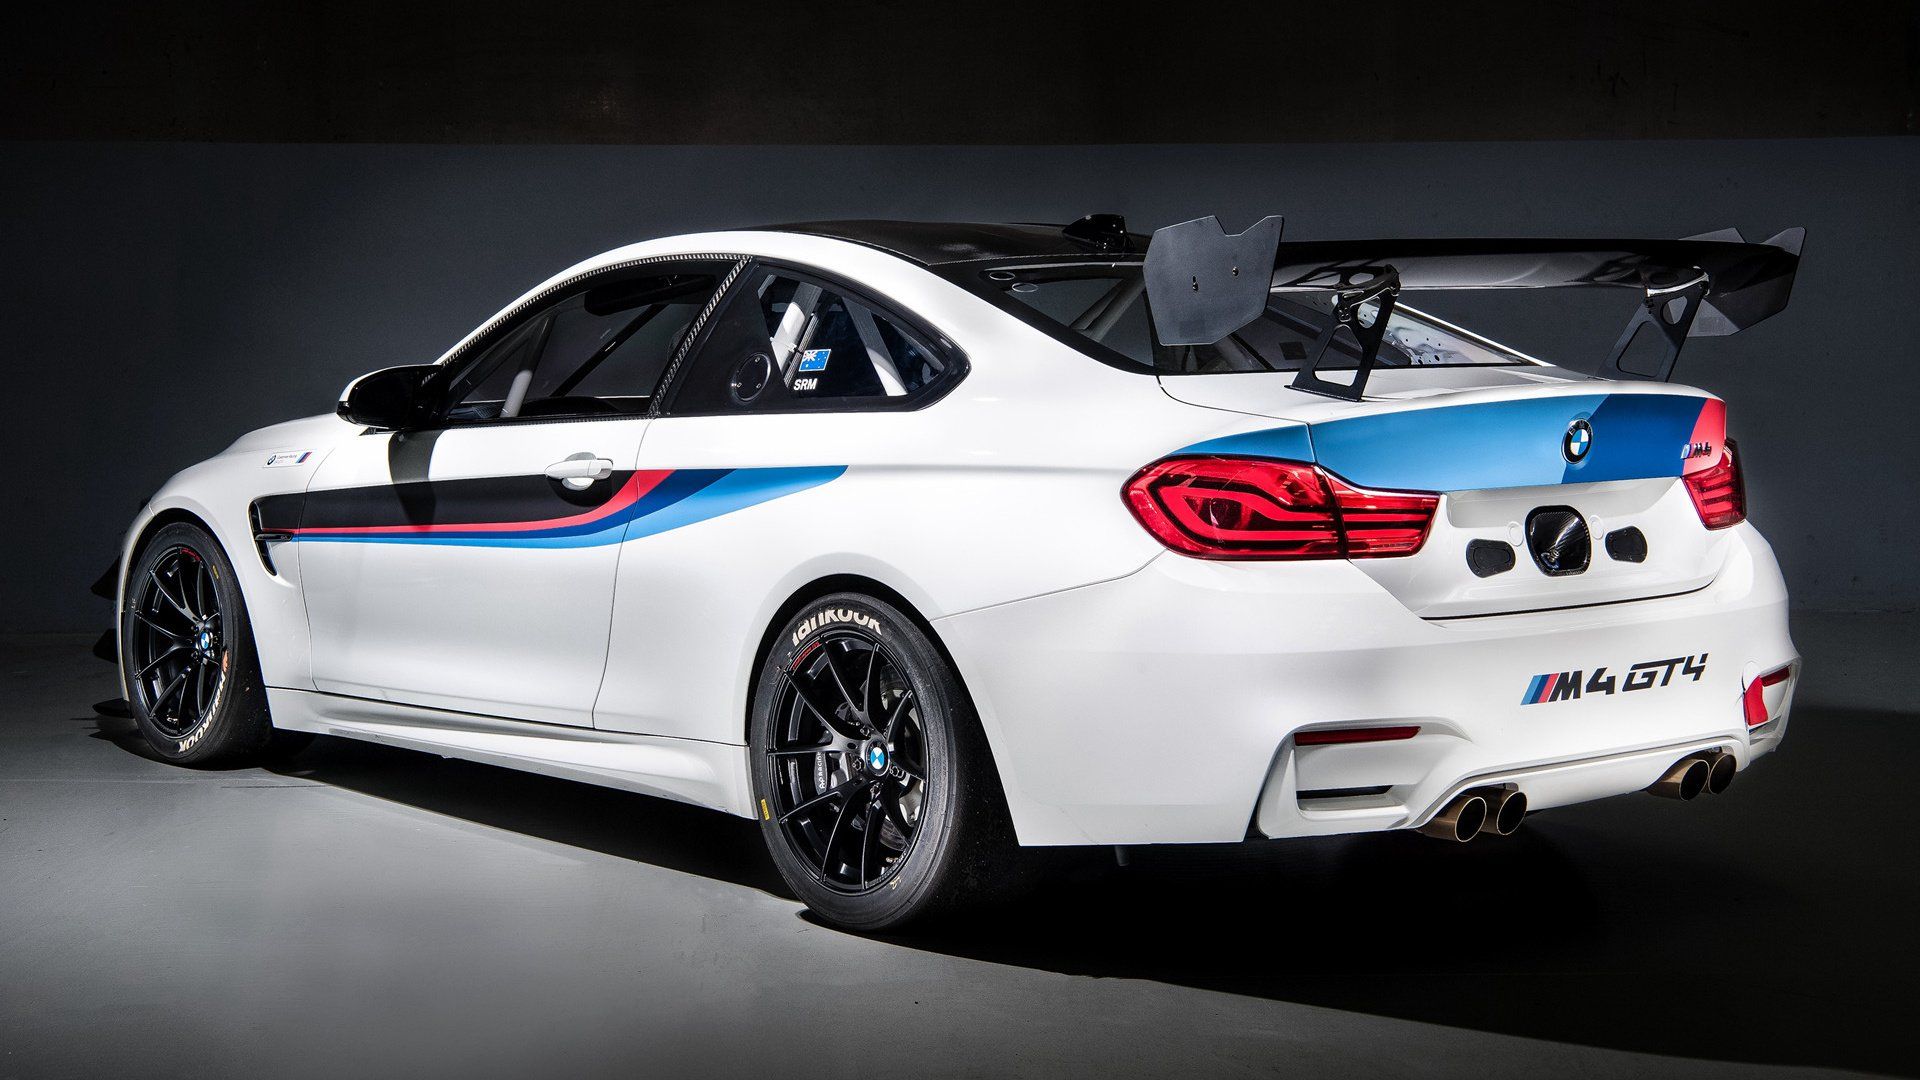 BMW M4 GT4 HD Wallpaper and Background Image